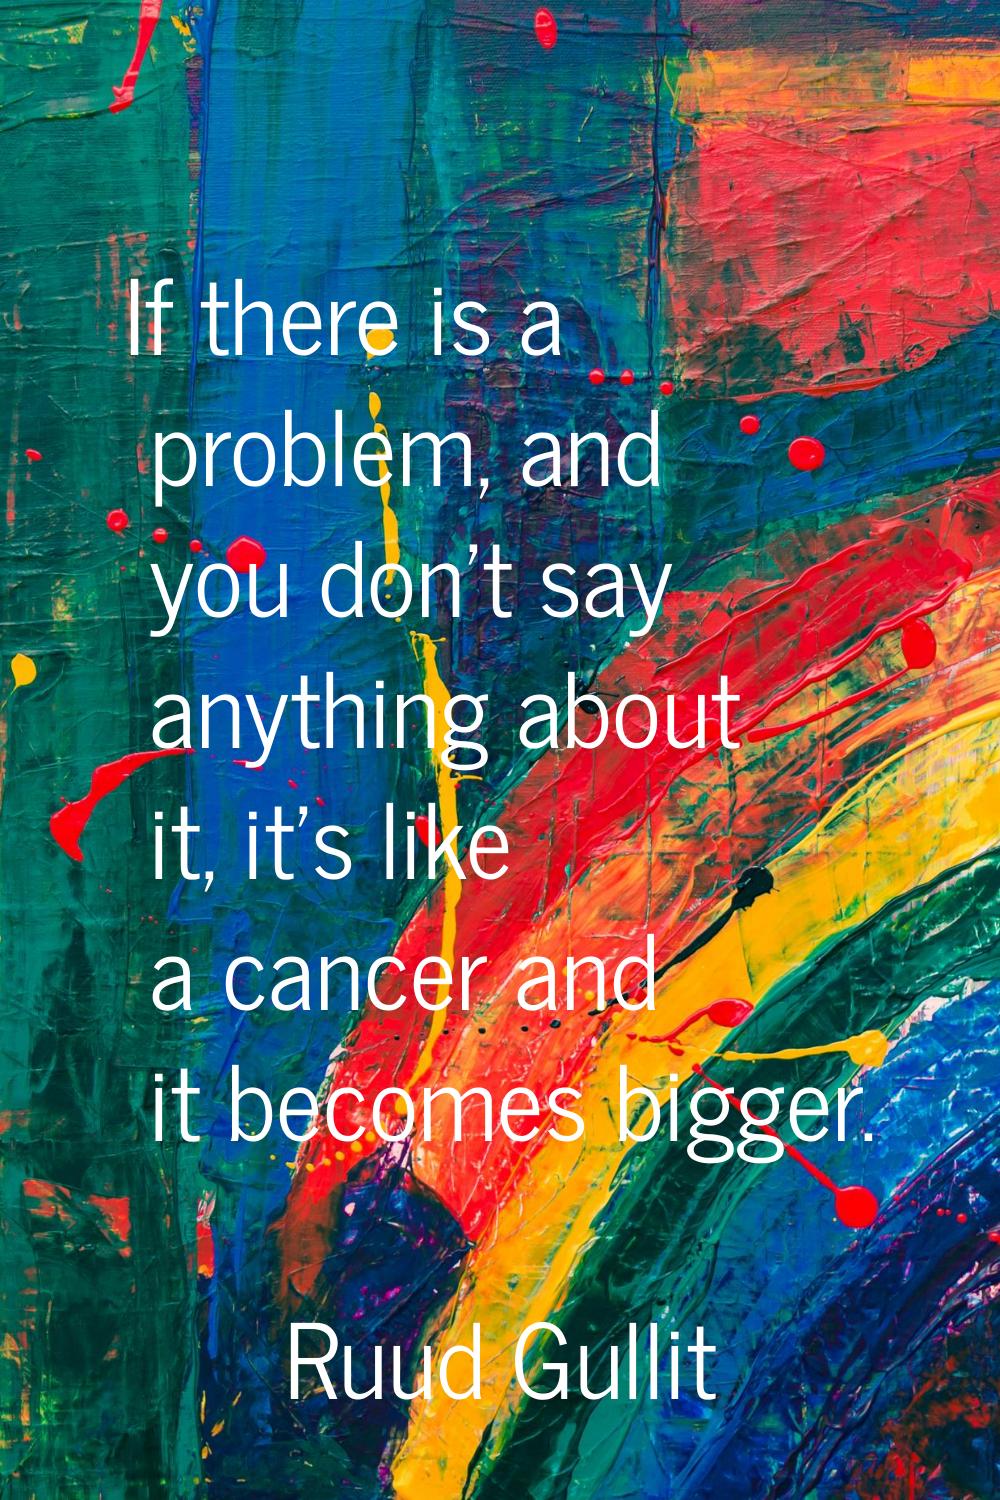 If there is a problem, and you don't say anything about it, it's like a cancer and it becomes bigge